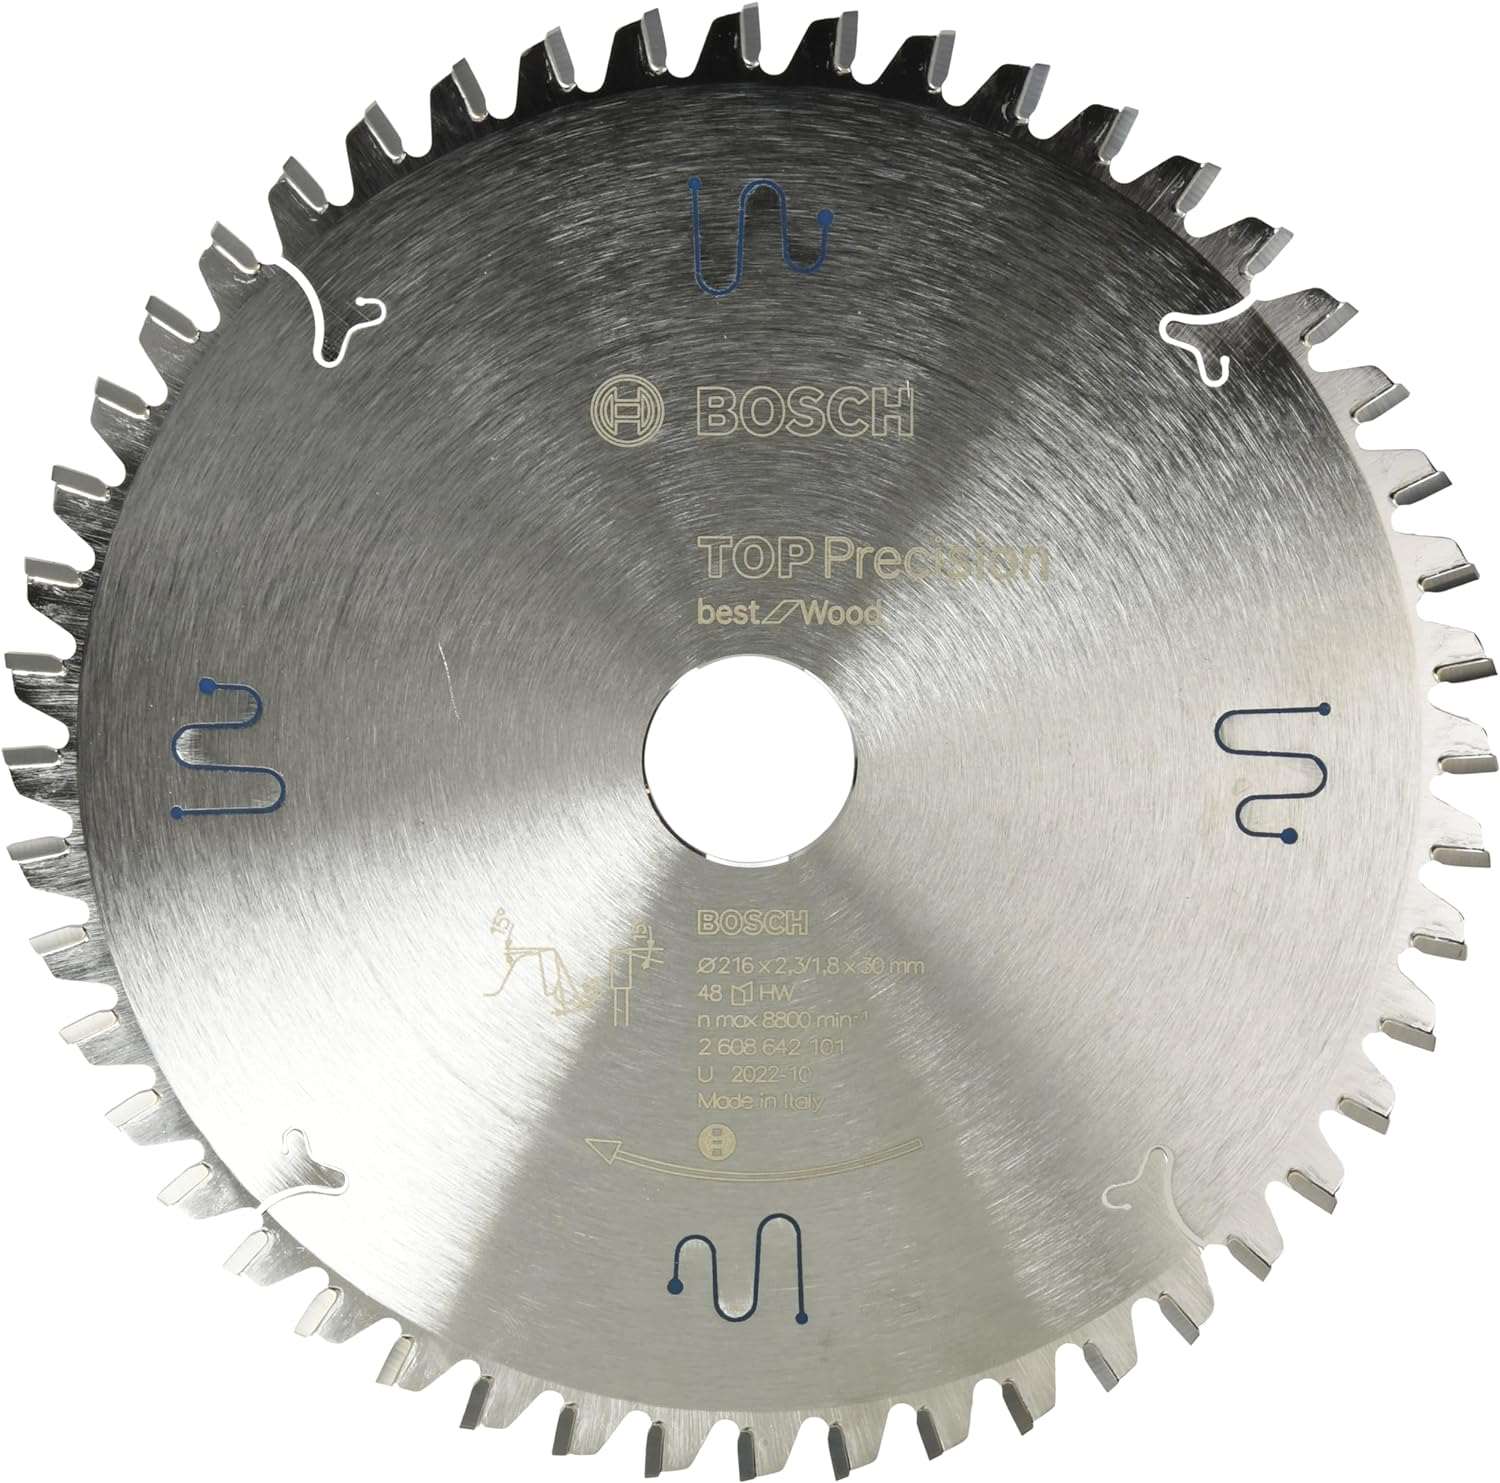 Bosch Best Circular Saw Blade for Wood 216 x 30 x 2.3 mm, 48 2608642101 Power Tool Services